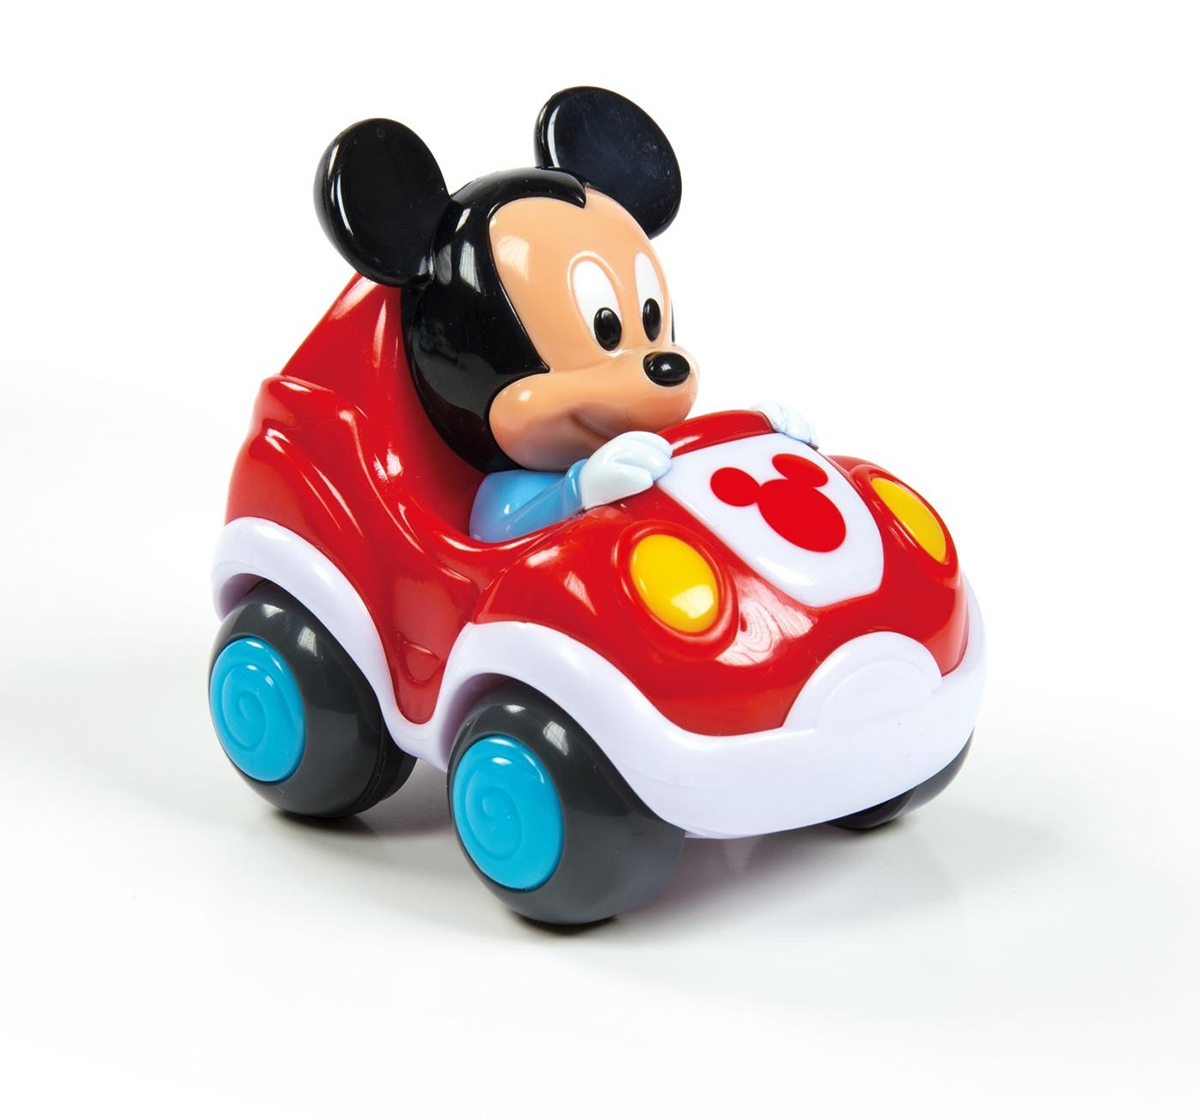 DISNEY | Disney Baby Pull Back Cars Activity Toy for Kids age 12M+ 0